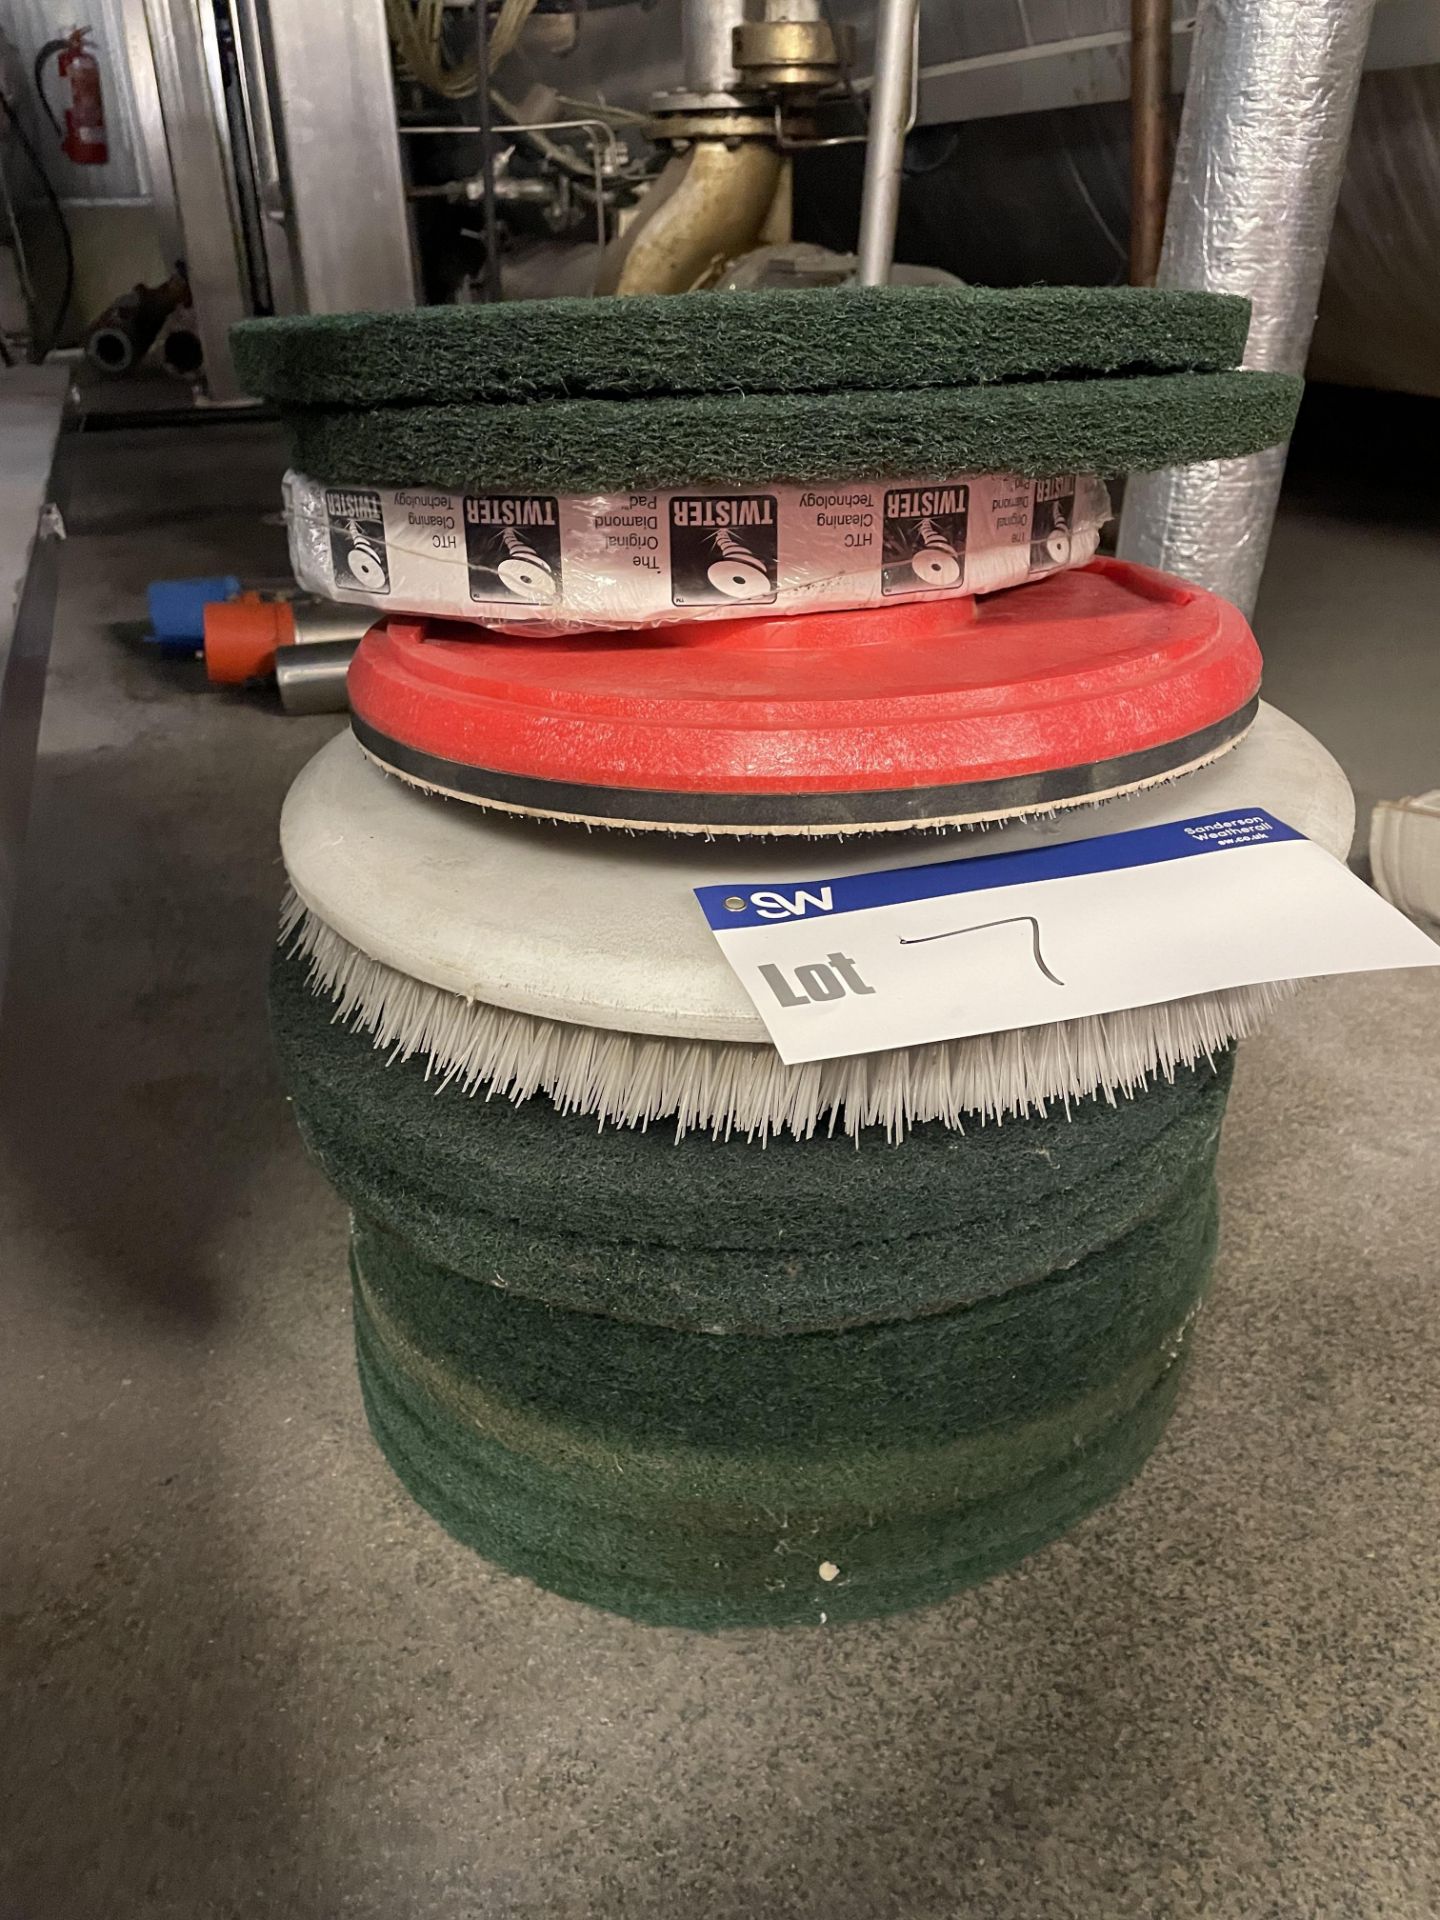 Floor Scrubber Machine Pads and Brushes (please no - Image 3 of 3